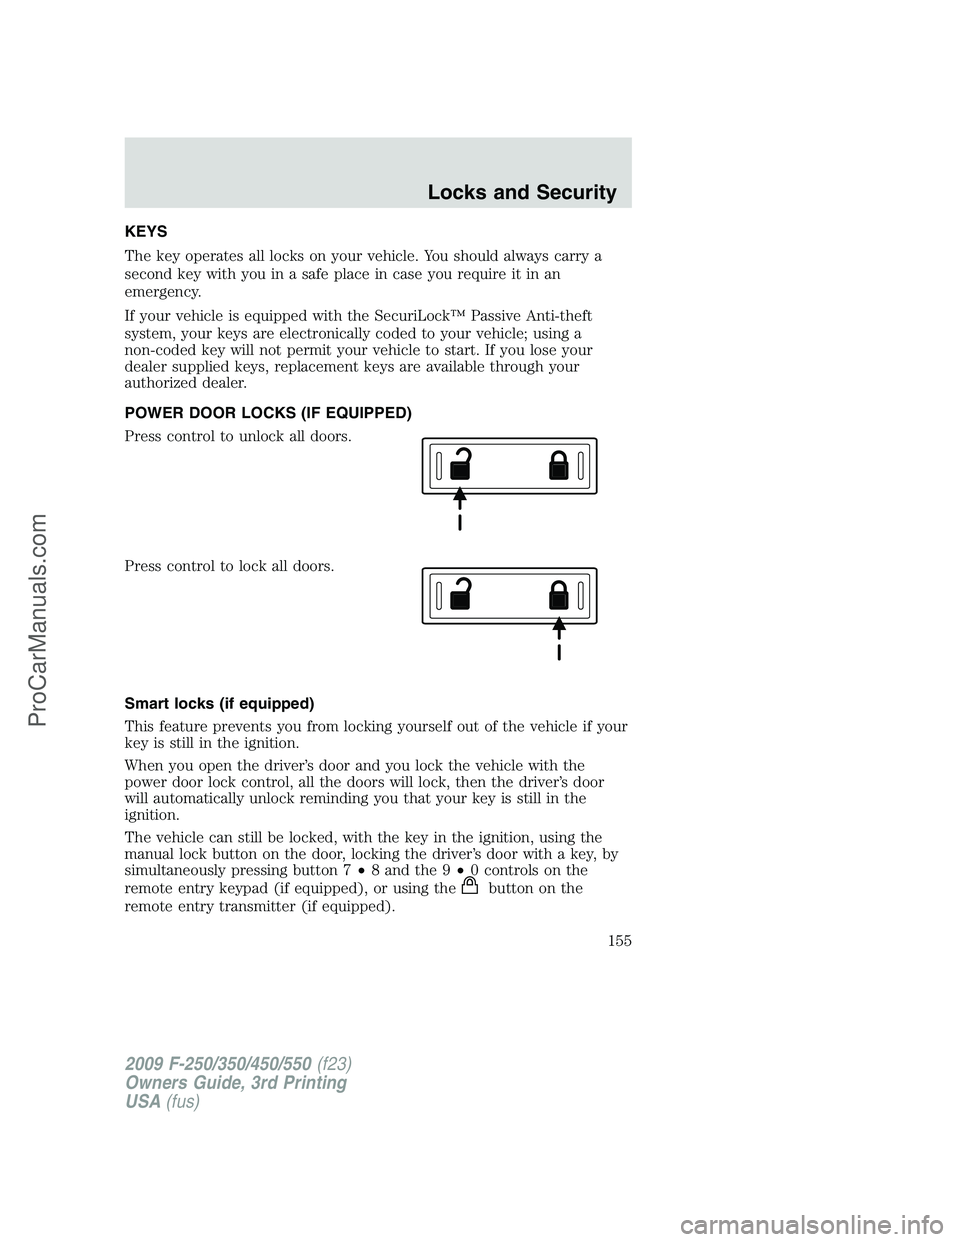 FORD F350 2009  Owners Manual KEYS
The key operates all locks on your vehicle. You should always carry a
second key with you in a safe place in case you require it in an
emergency.
If your vehicle is equipped with the SecuriLock�